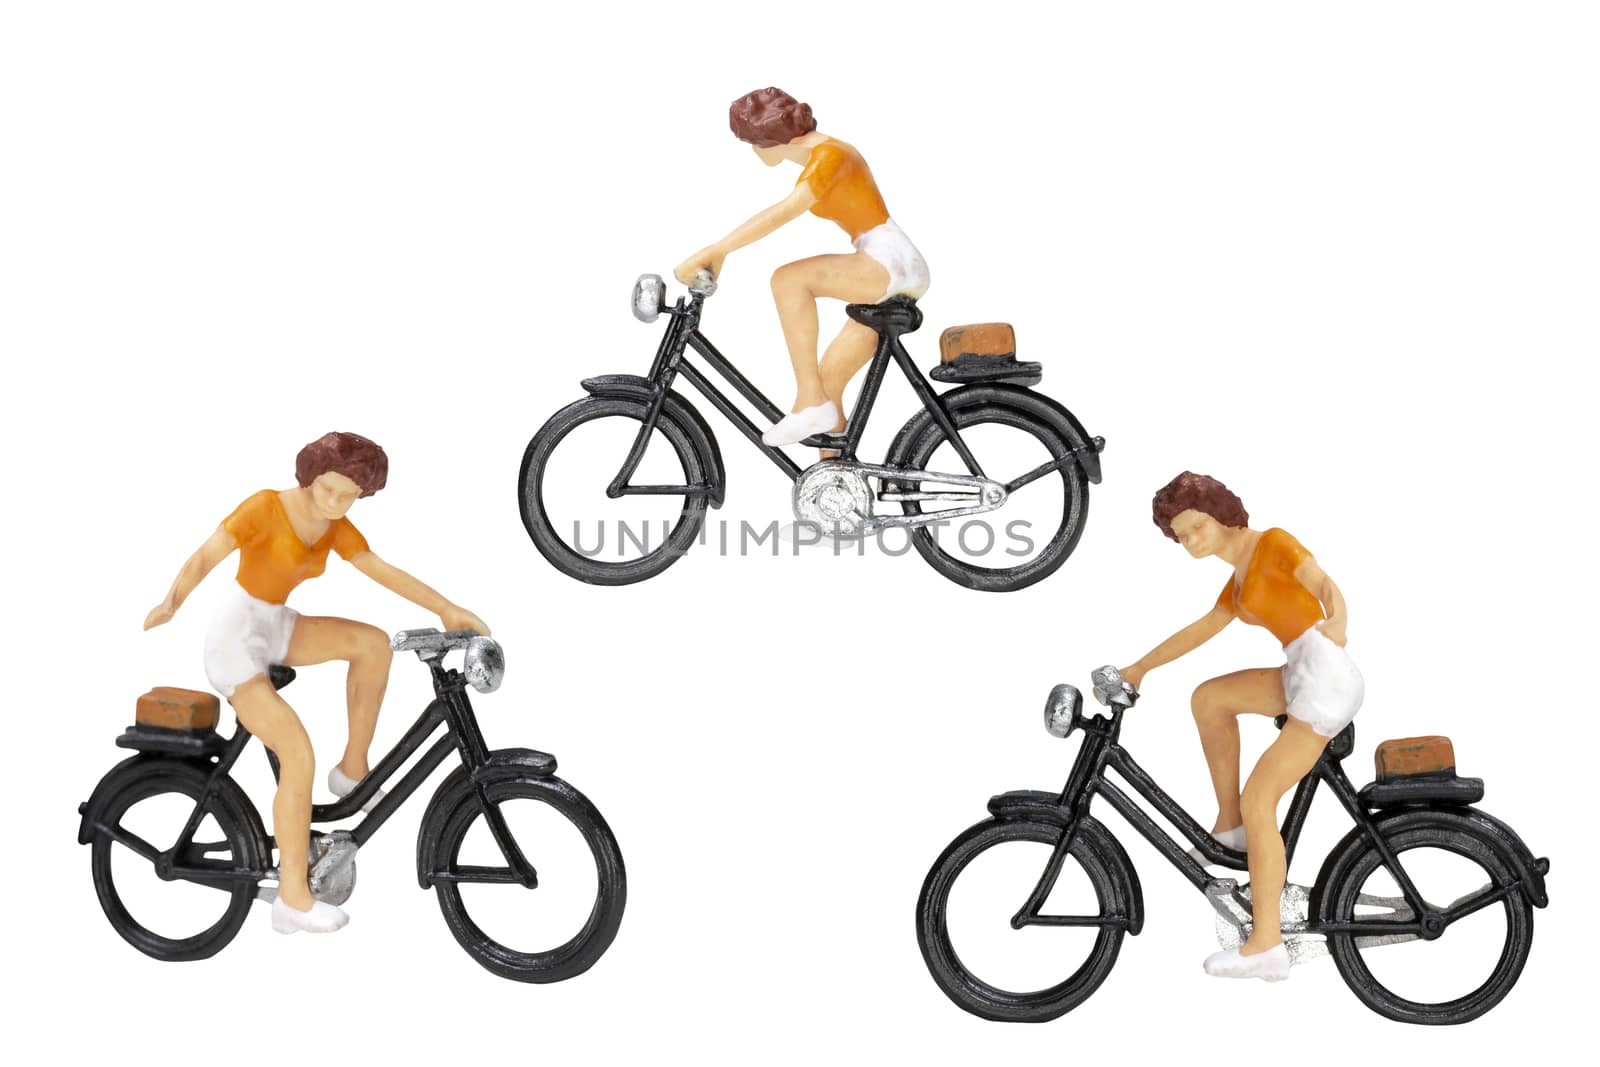 Miniature people travellers with bicycle isolate on white background with clipping path